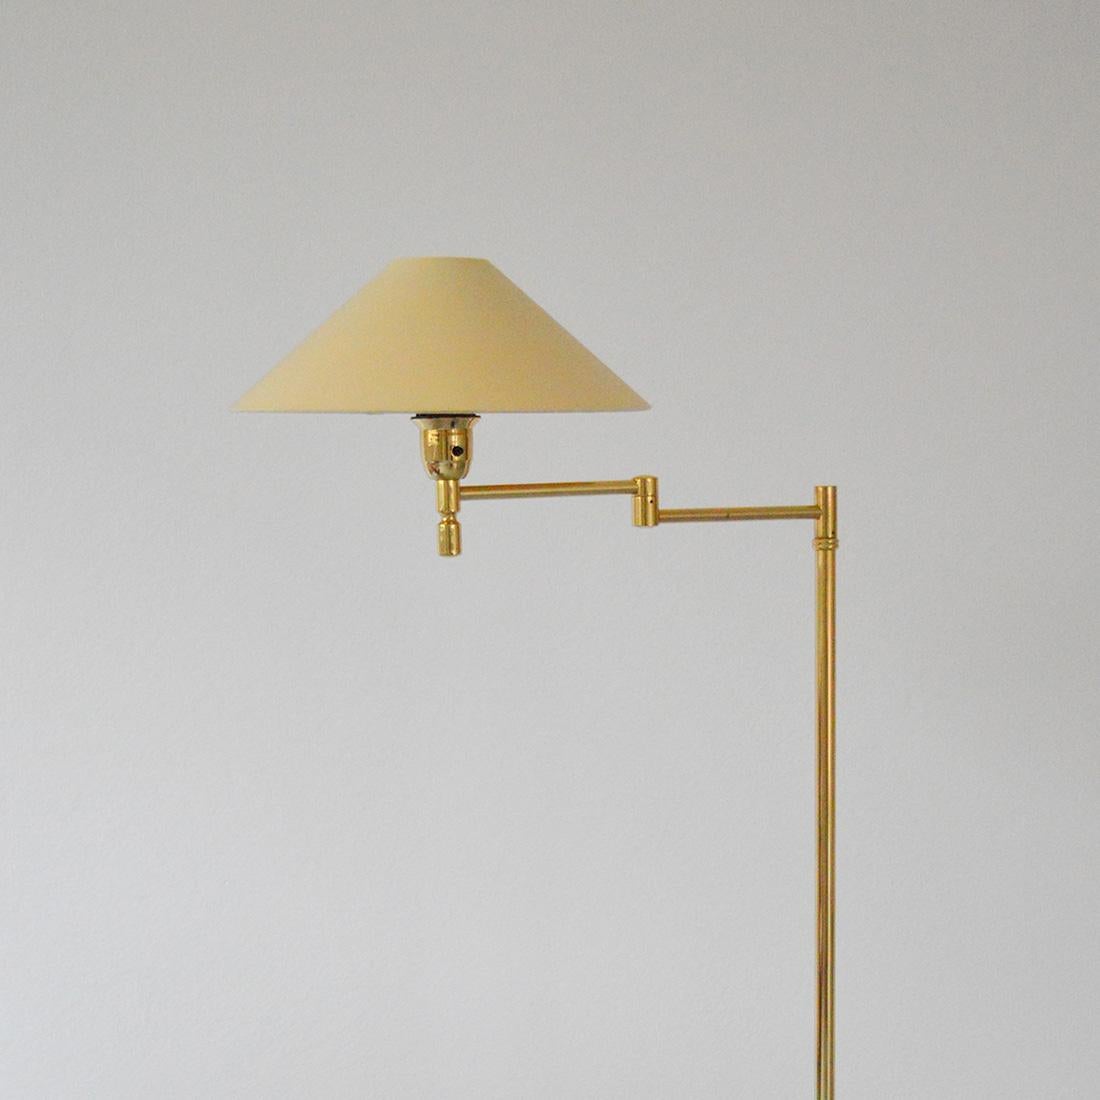 Adjustable Swedish brass floor lamp designed by Ewå Värnamo and manufactured by EWÅ in Sweden, 1970s.

Designed in the 1970s by Ewå Värnamo, this unique floor lamp is made entirely of brass and features an original fabric shade. The lamp's brass